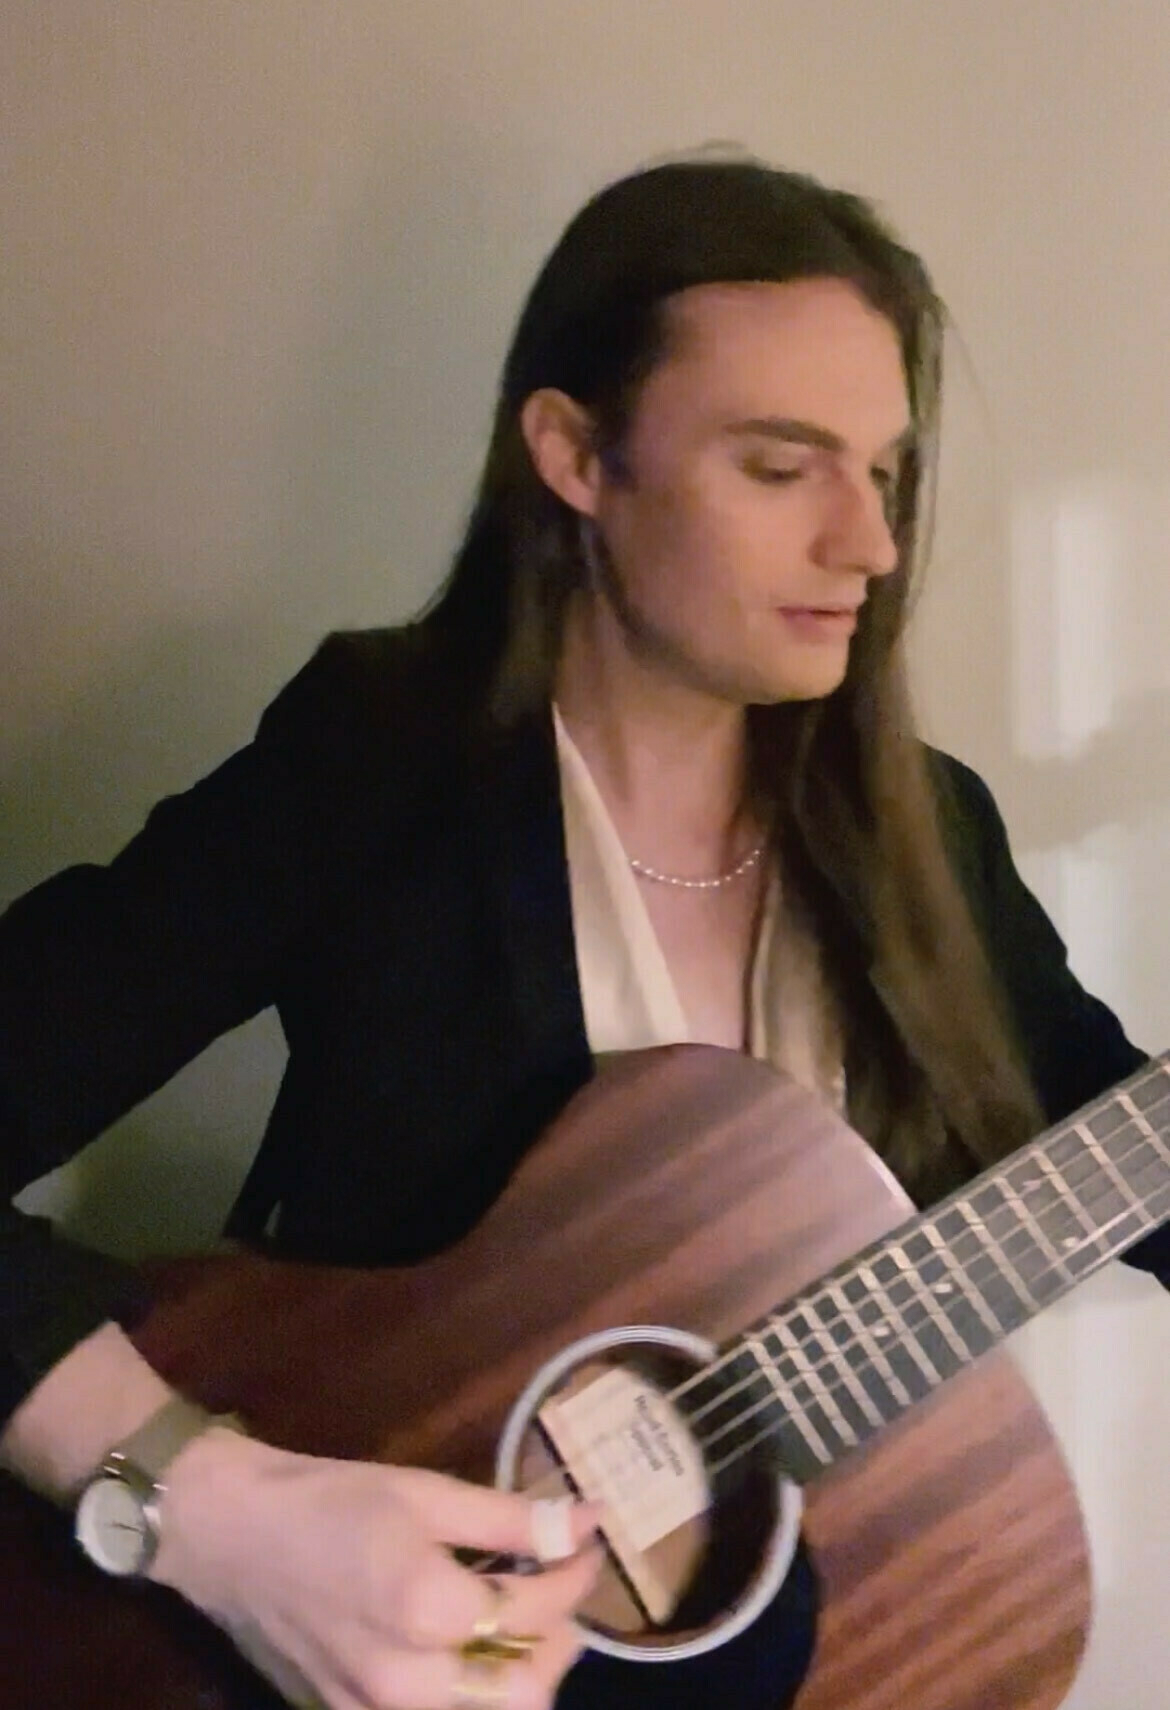 Hunter's wearing a satin shirt and black blazer. His long brown hair is down. His guitar is strapped on.